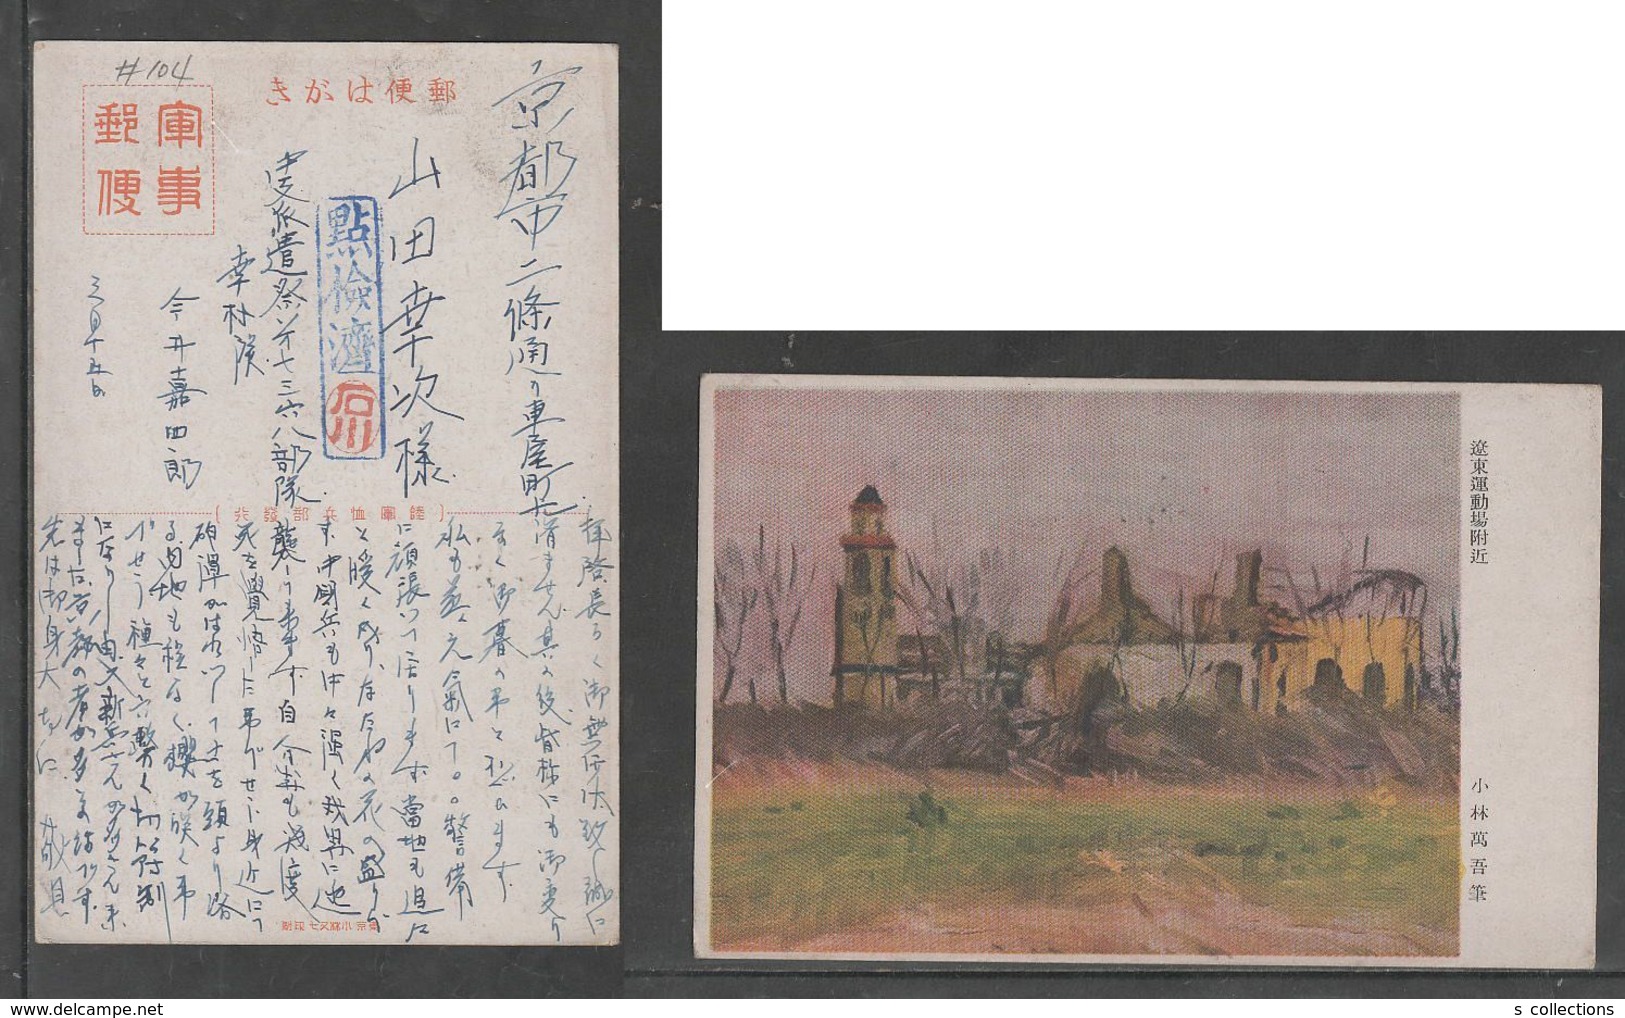 JAPAN WWII Military Liaodong Picture Postcard CENTRAL CHINA WW2 MANCHURIA CHINE MANDCHOUKOUO JAPON GIAPPONE - 1943-45 Shanghái & Nankín